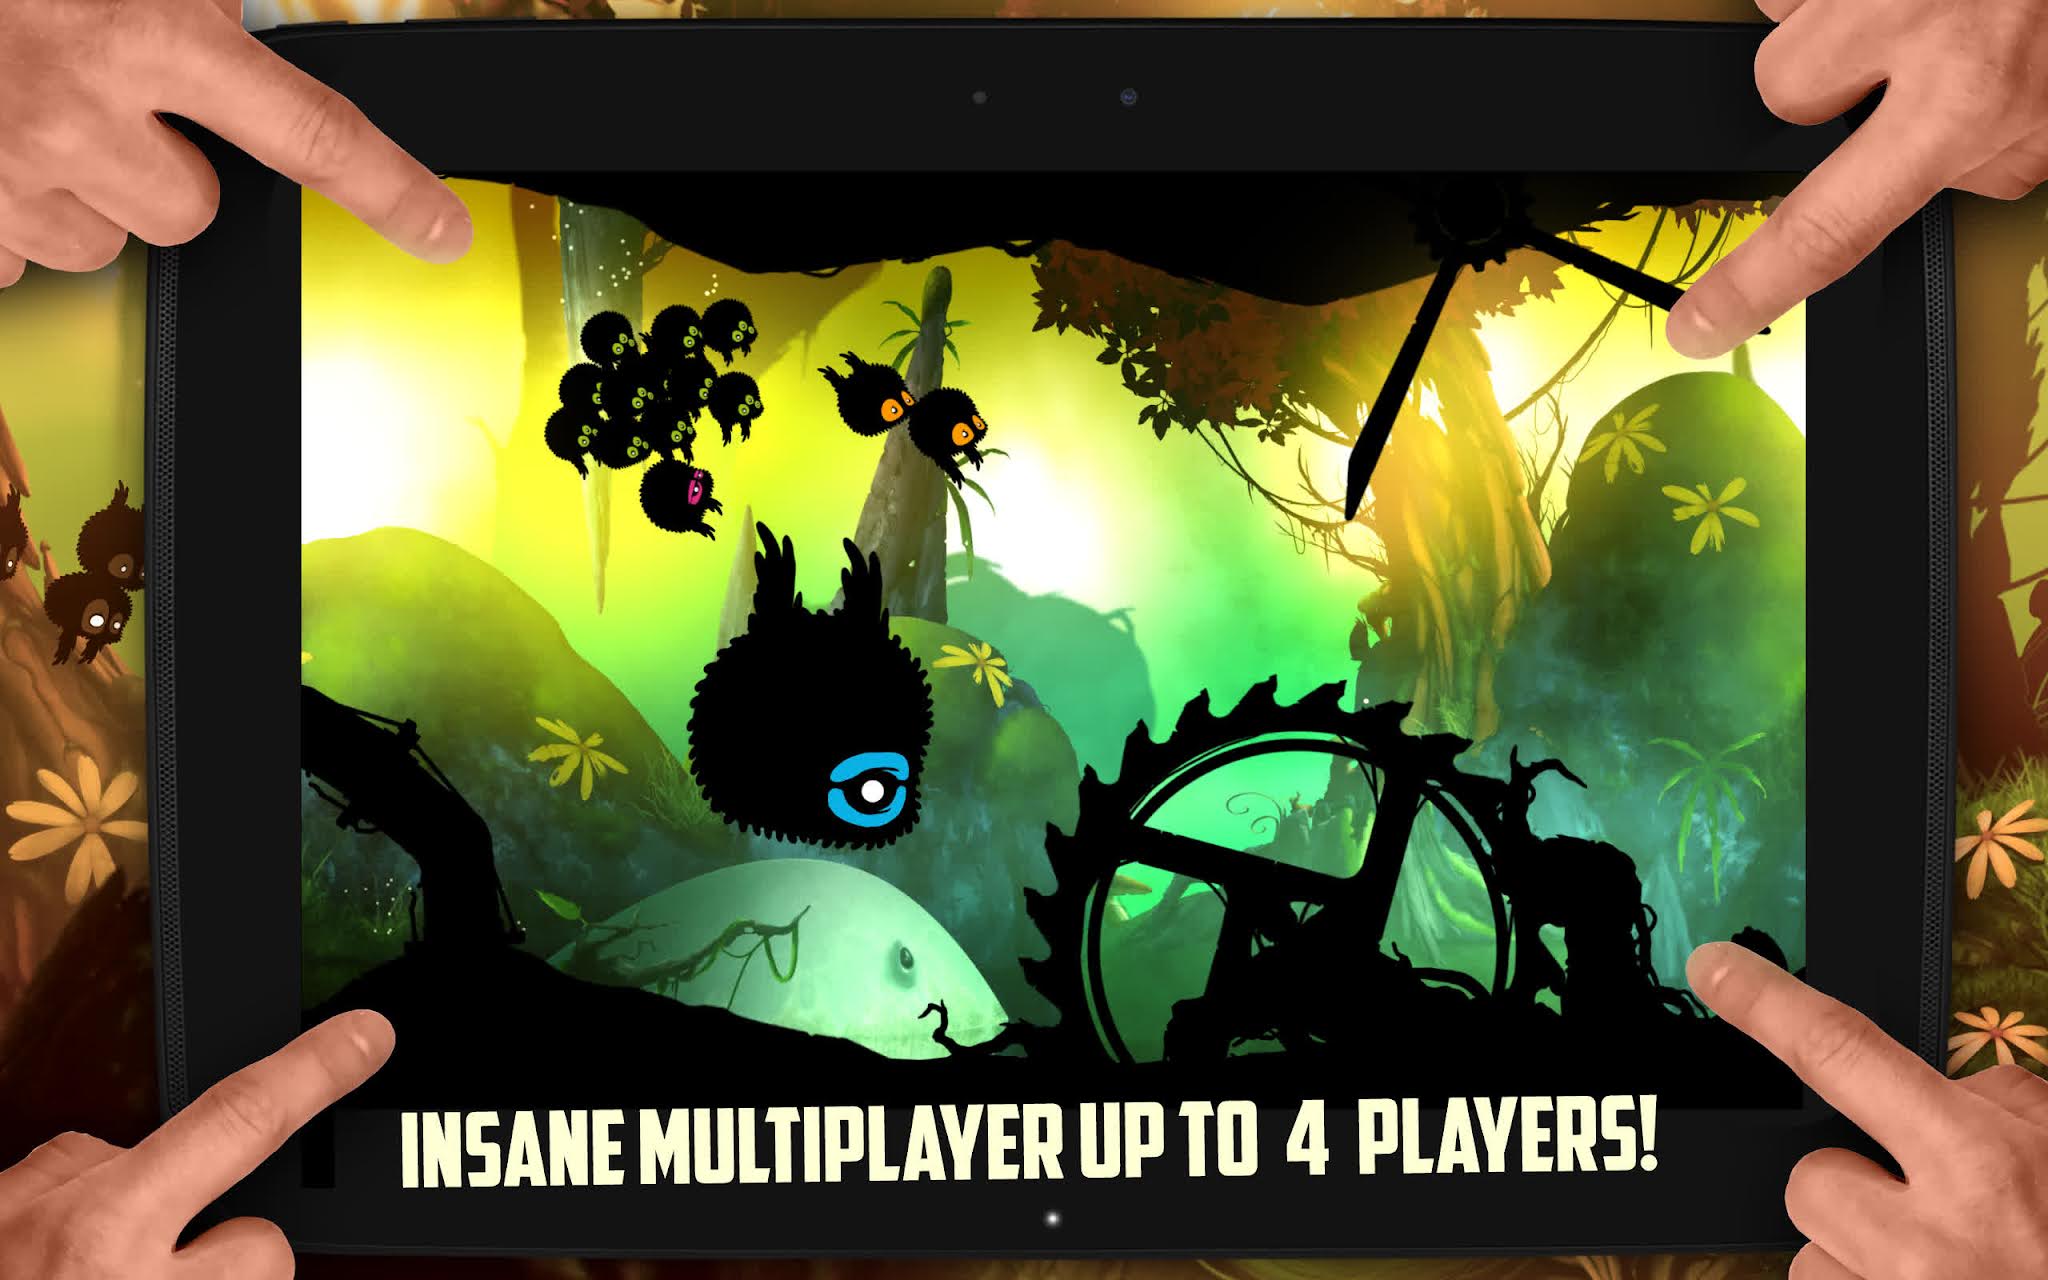 Badland game for android and ios | لعبة بادلاند للأندرويد و ios